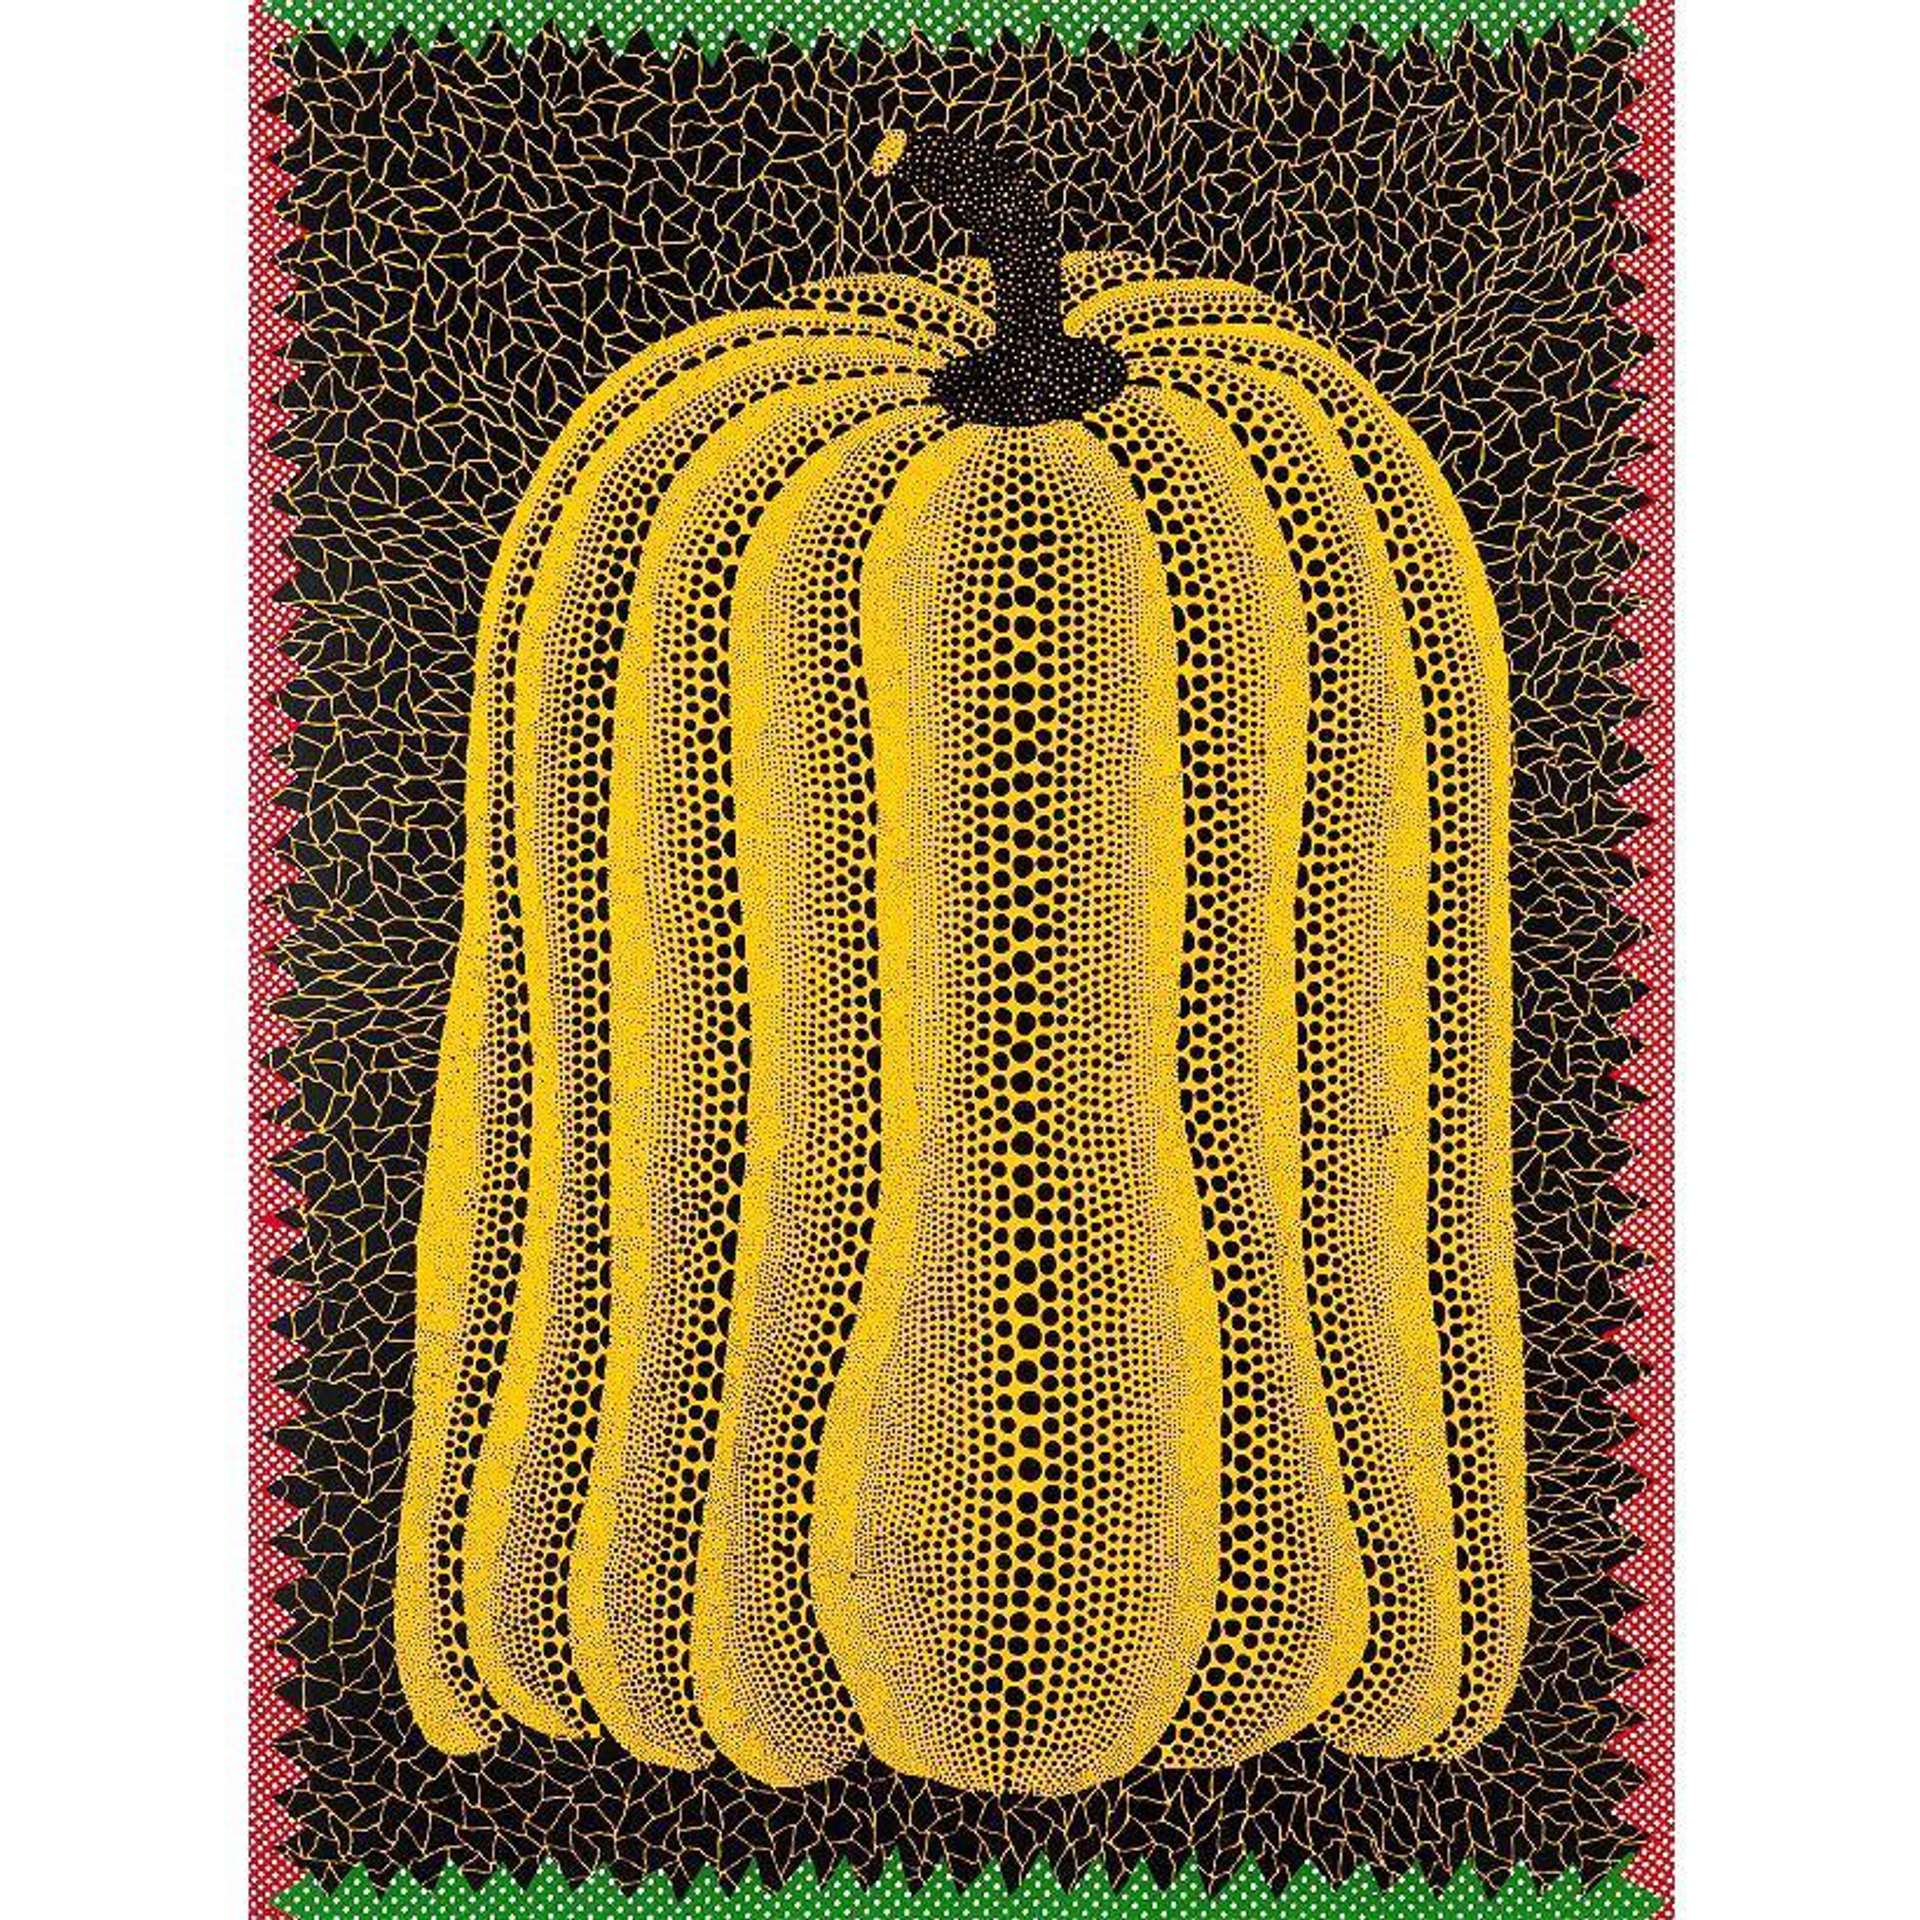 A screenprint by Yayoi Kusama depicting an elongated yellow pumpkin with black polka dots, set against a black and yellow patterned background with green and red stripes around the border